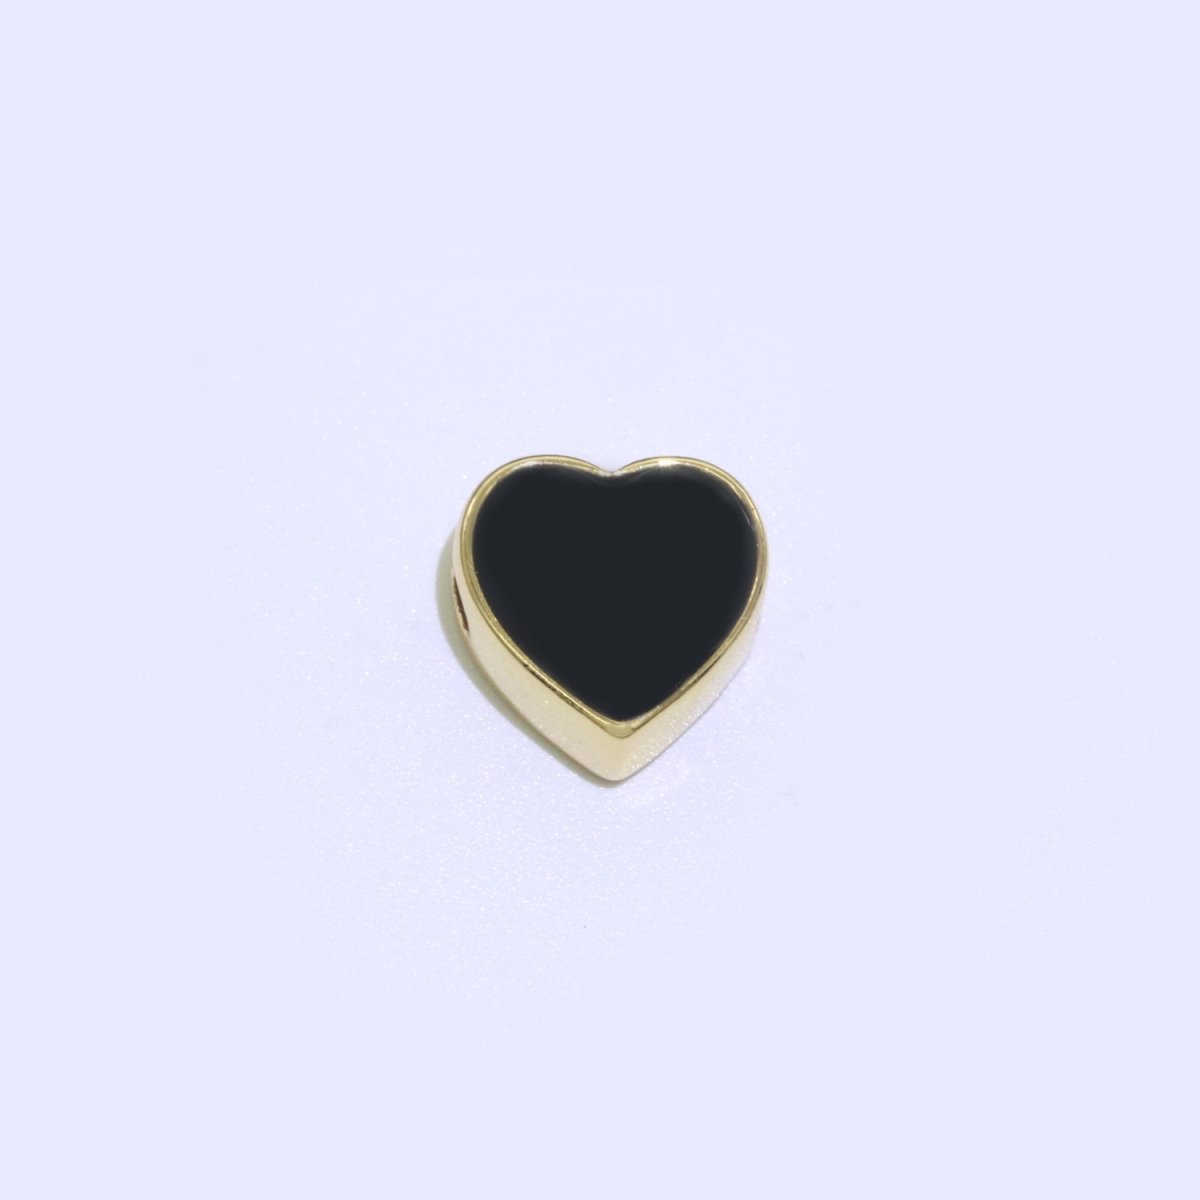 Dainty Colorful Heart Spacer Beads, Green Black Pink Yellow White Teal Heart beads for Necklace Bracelet Component 10mm Beads B-583 to B-592 - DLUXCA